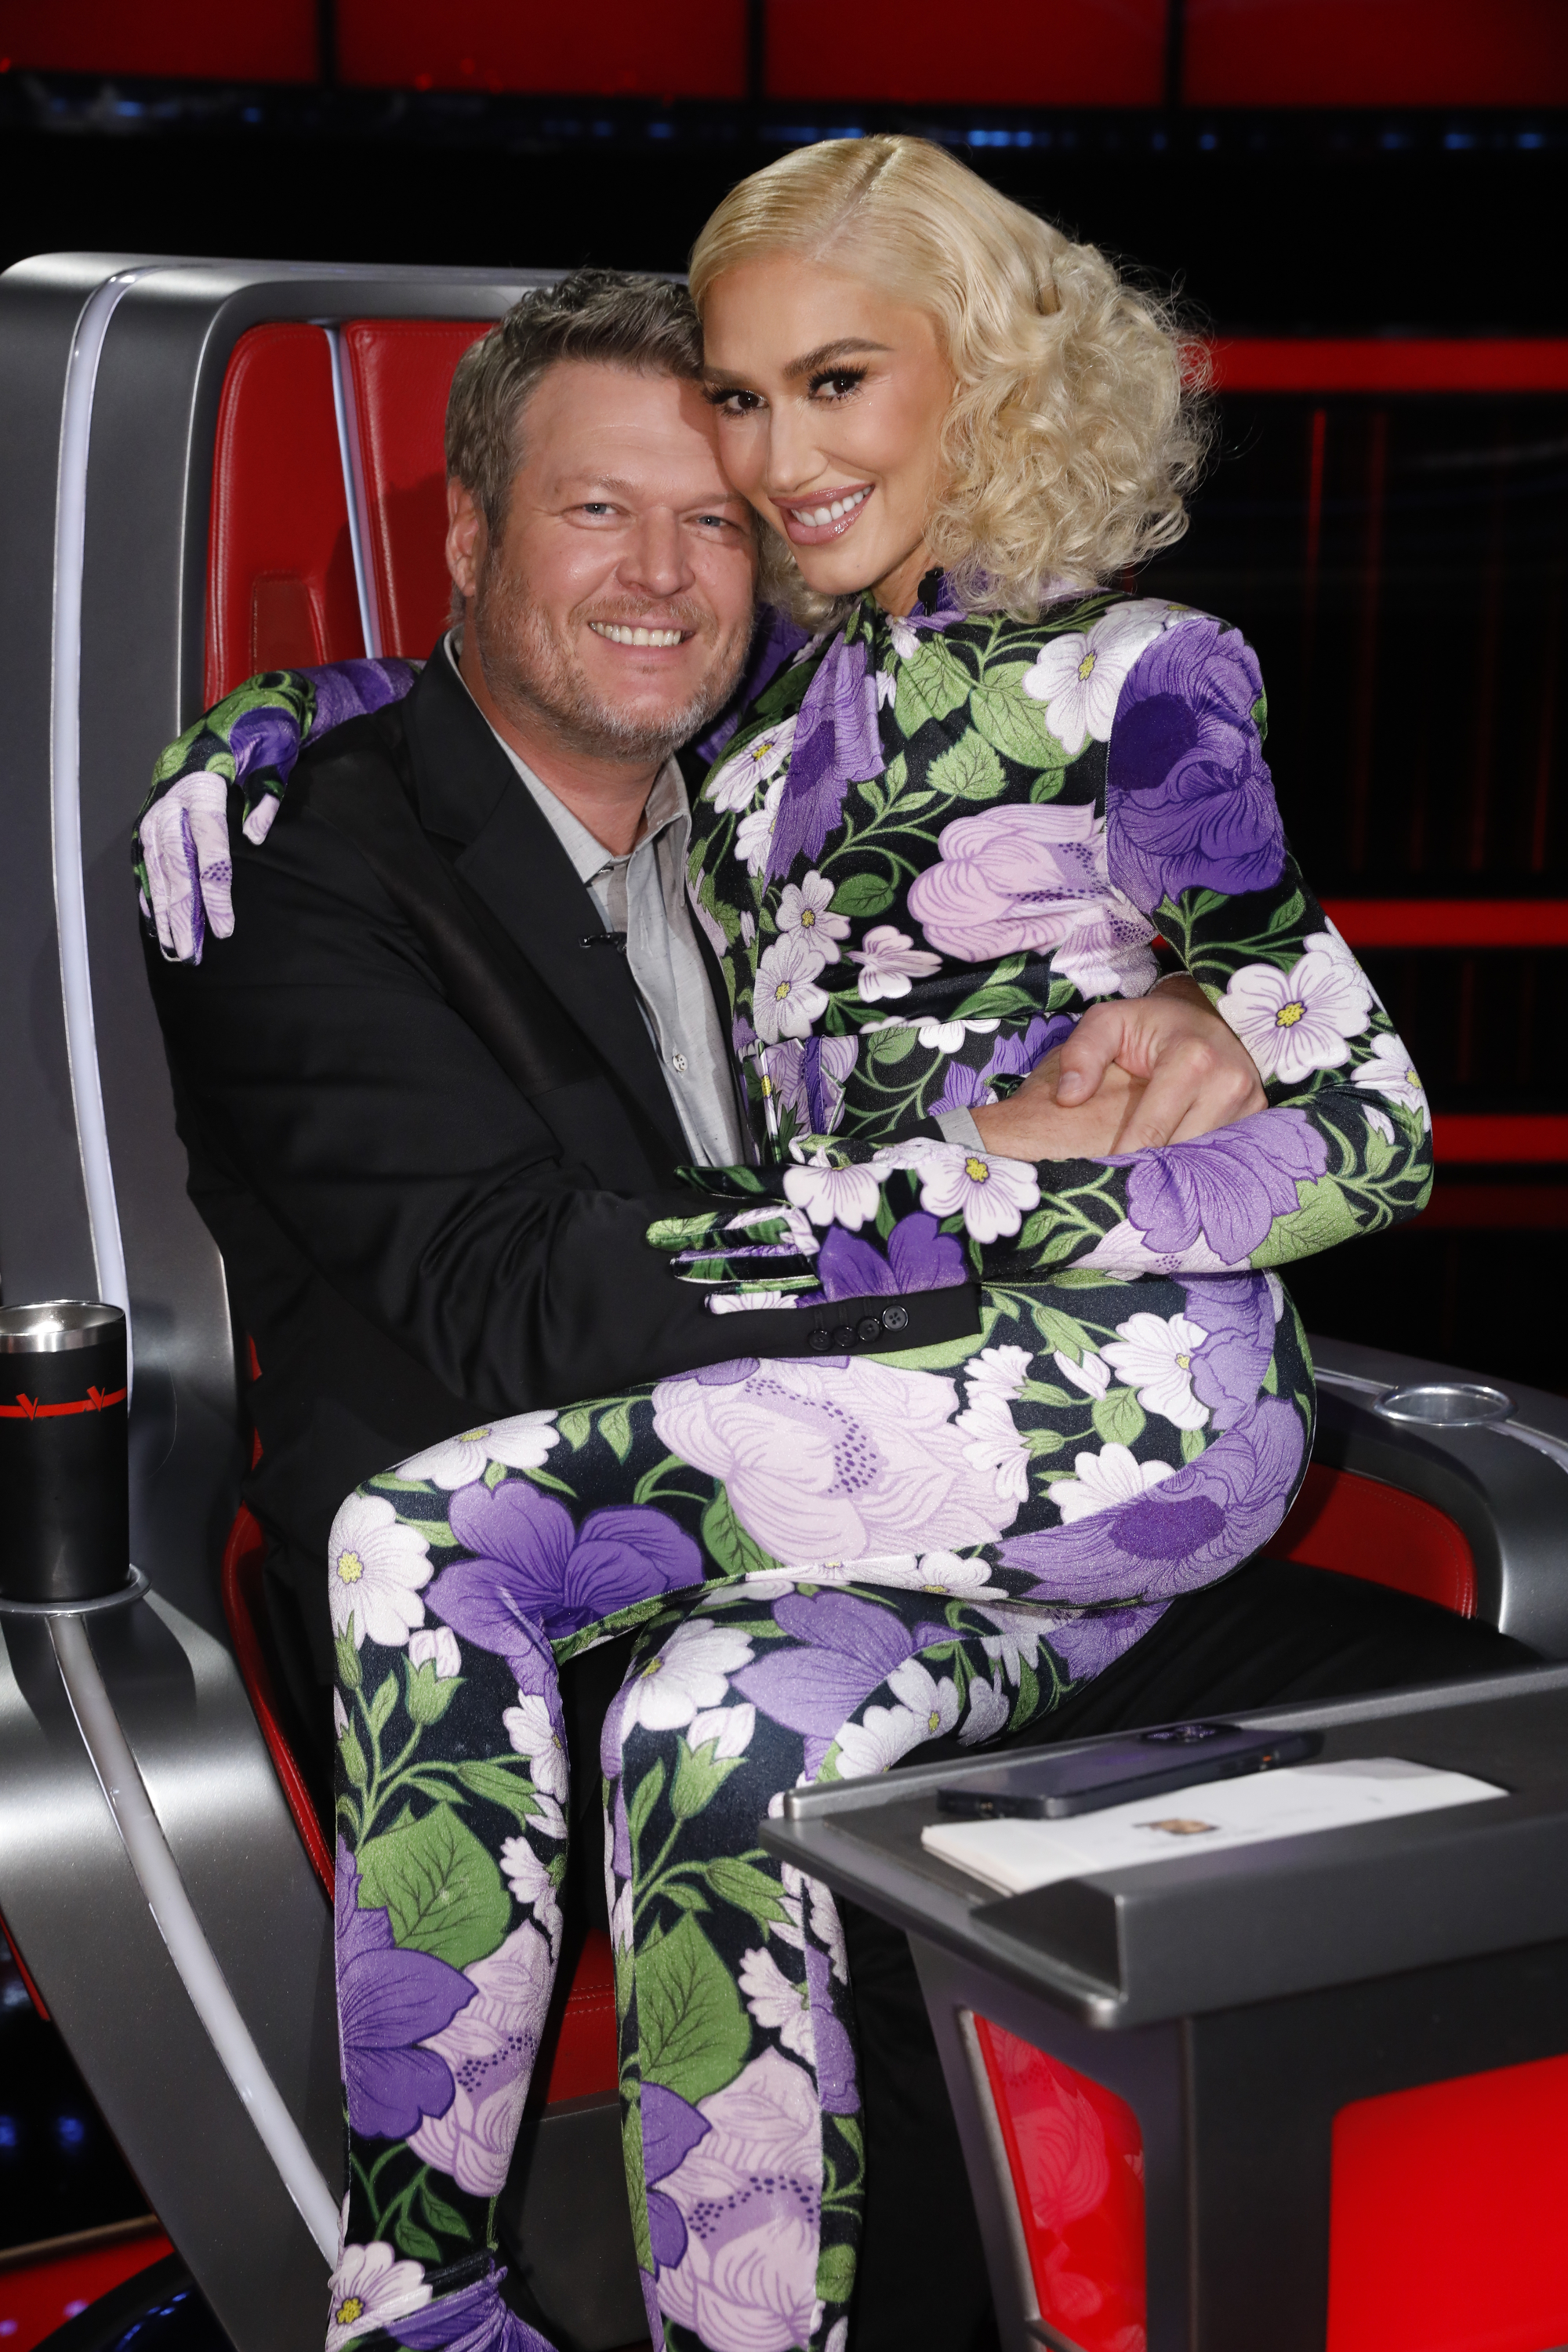 The couple was introduced during Season 7 of The Voice